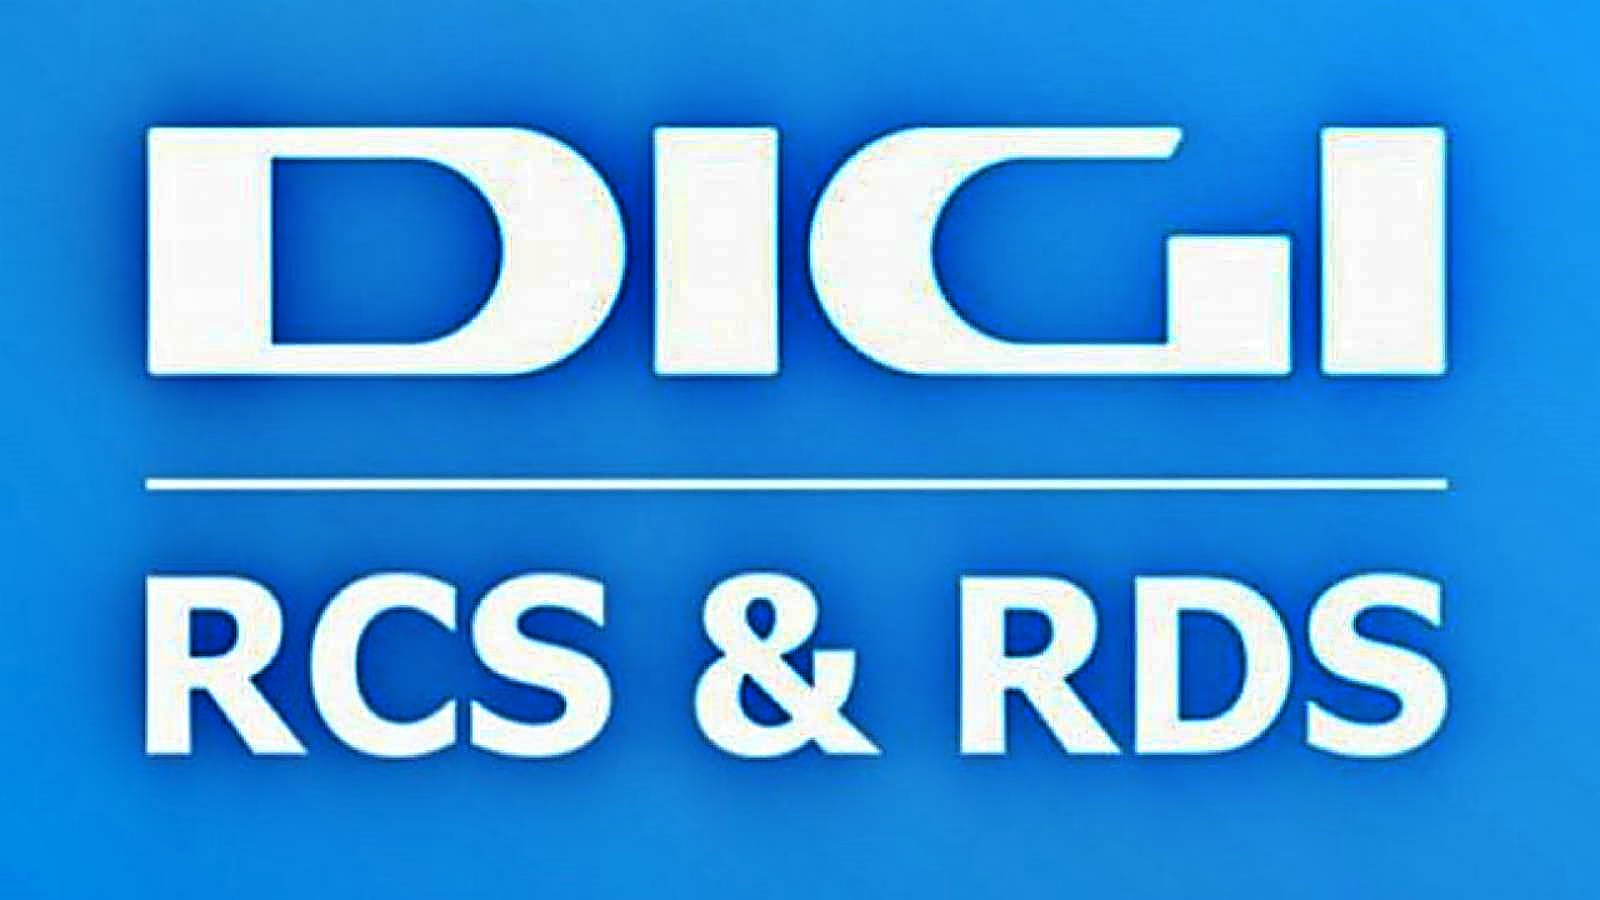 RCS & RDS OFFICIAL Information Targets Romanian Customers